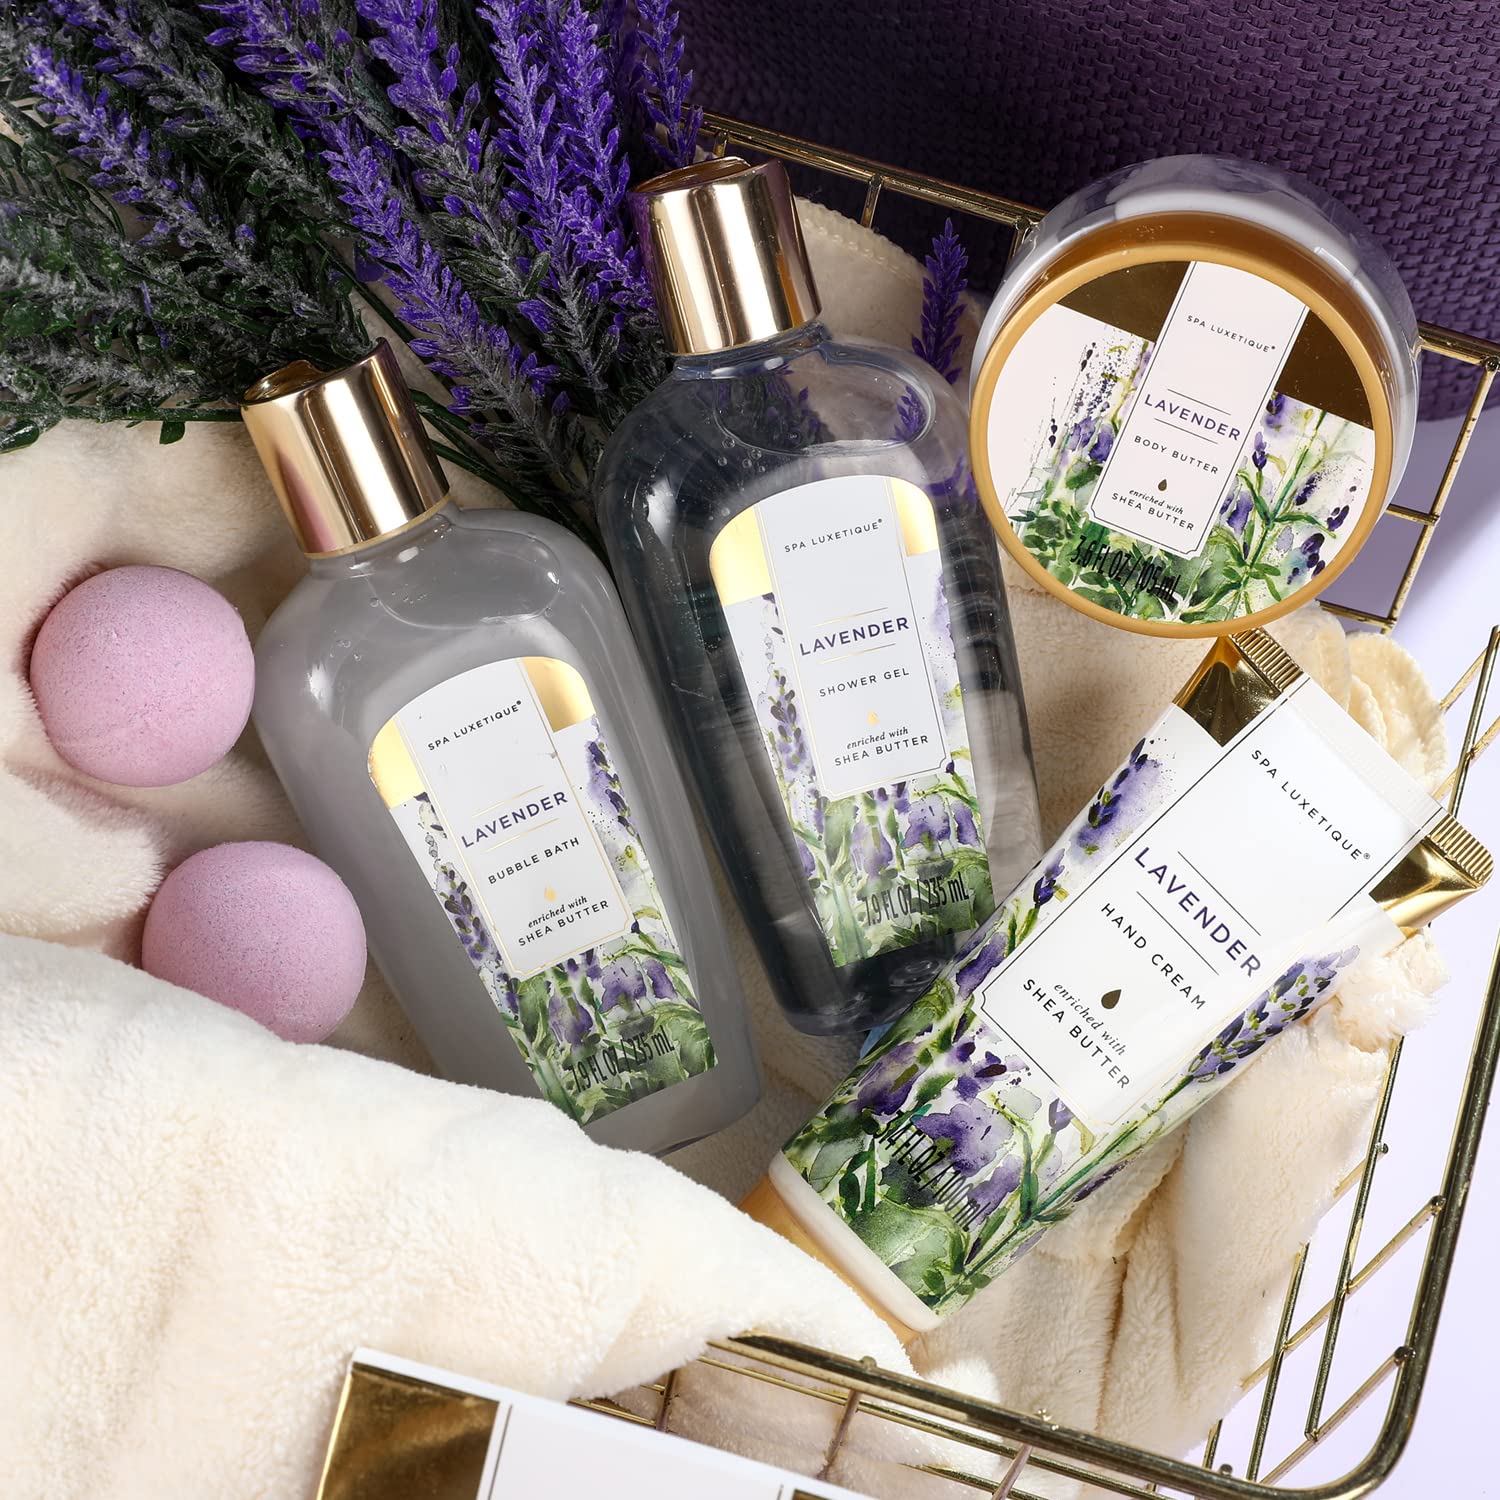 Spa Luxetique Bath Gift Sets for Women Lavender Body Care Baskets - 10 Pcs Relaxing Holiday Birthday Gifts for Her - image 3 of 9